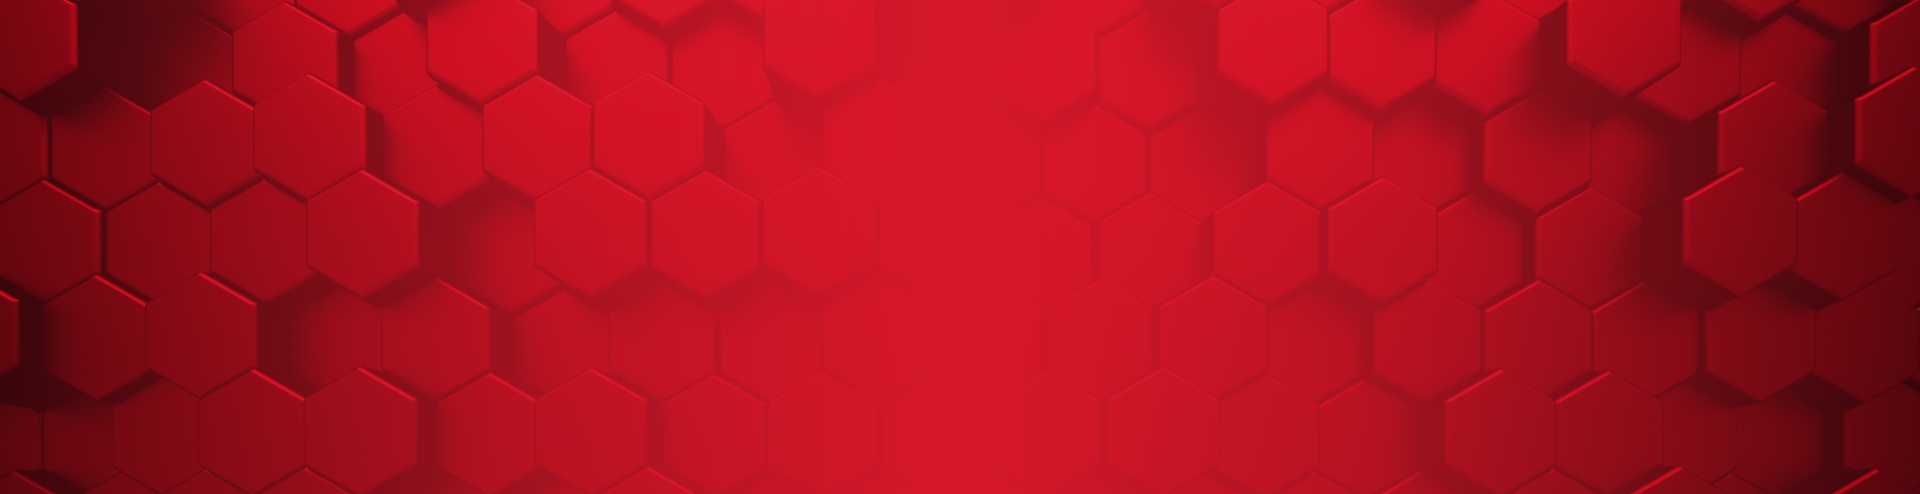 red content background image